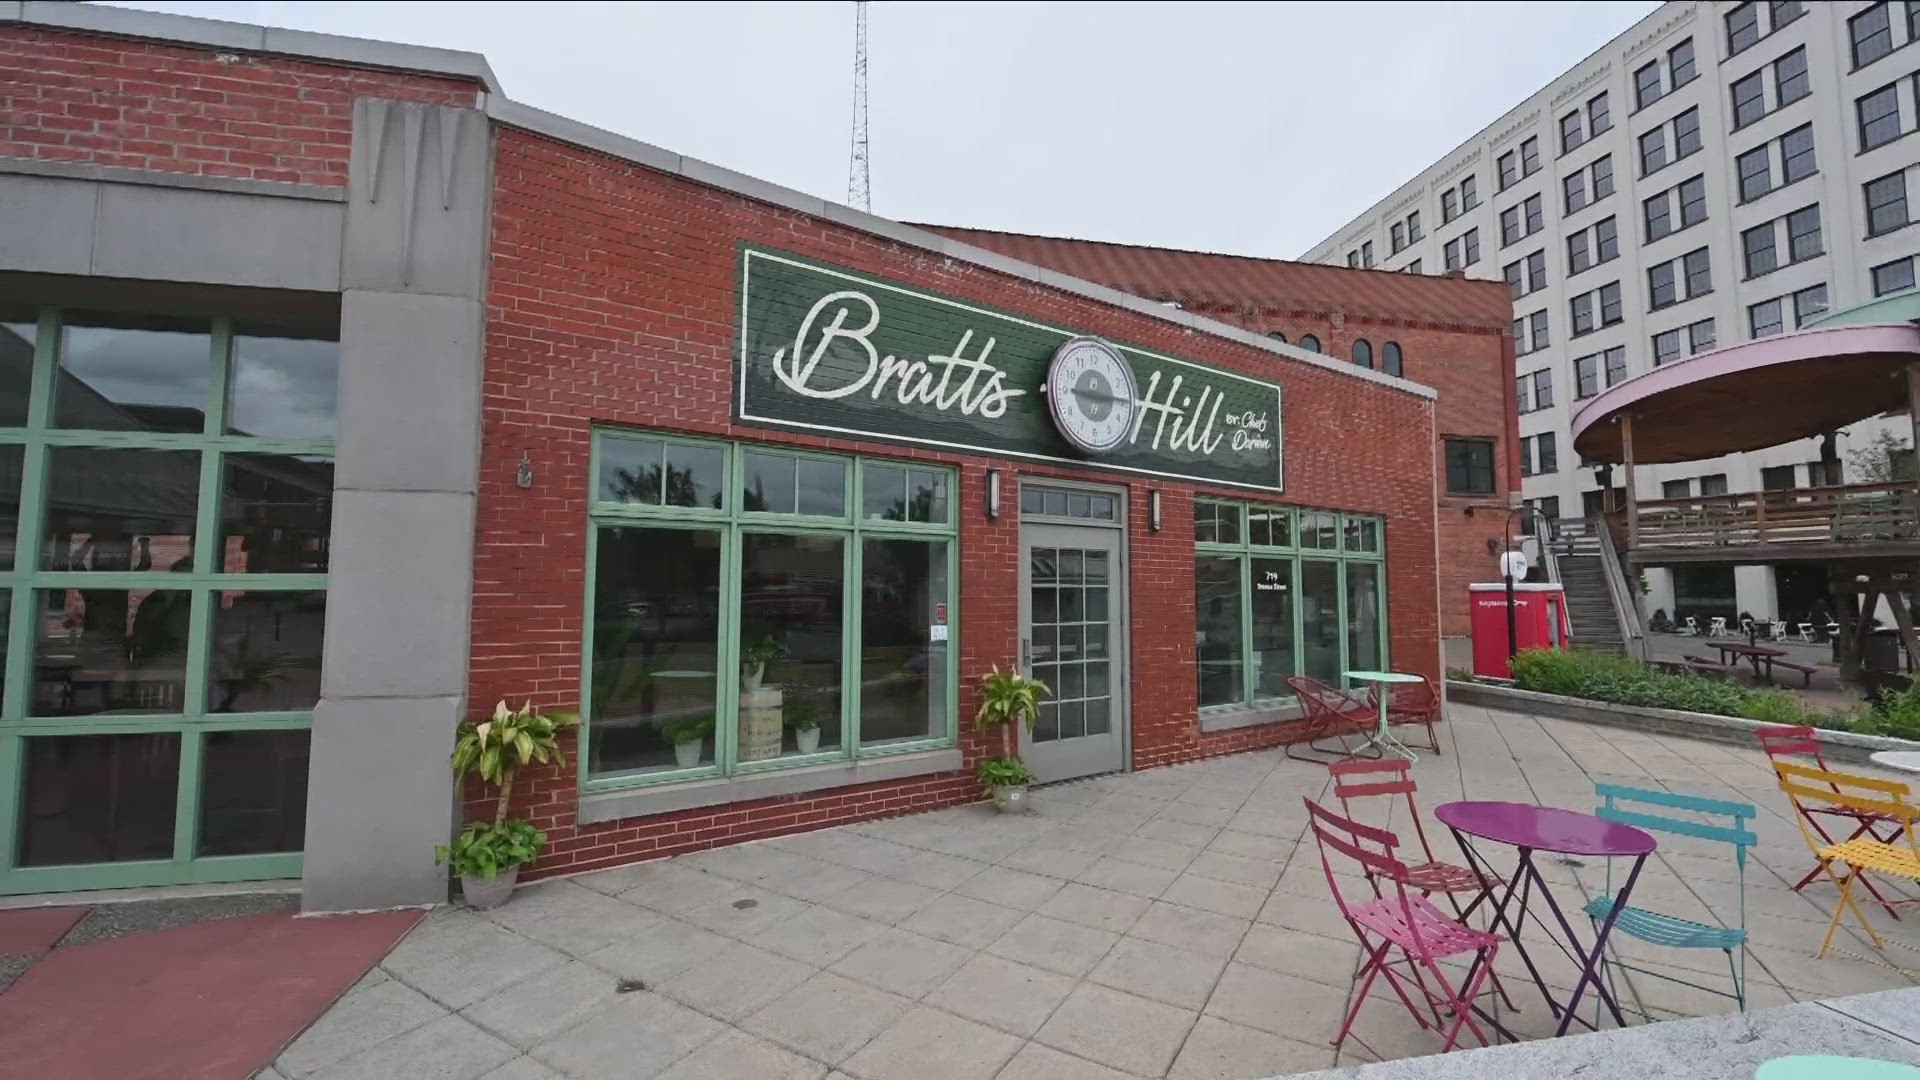 An up-close look at Bratts Hill, Chef Darian Bryan's new restaurant in Larkenville